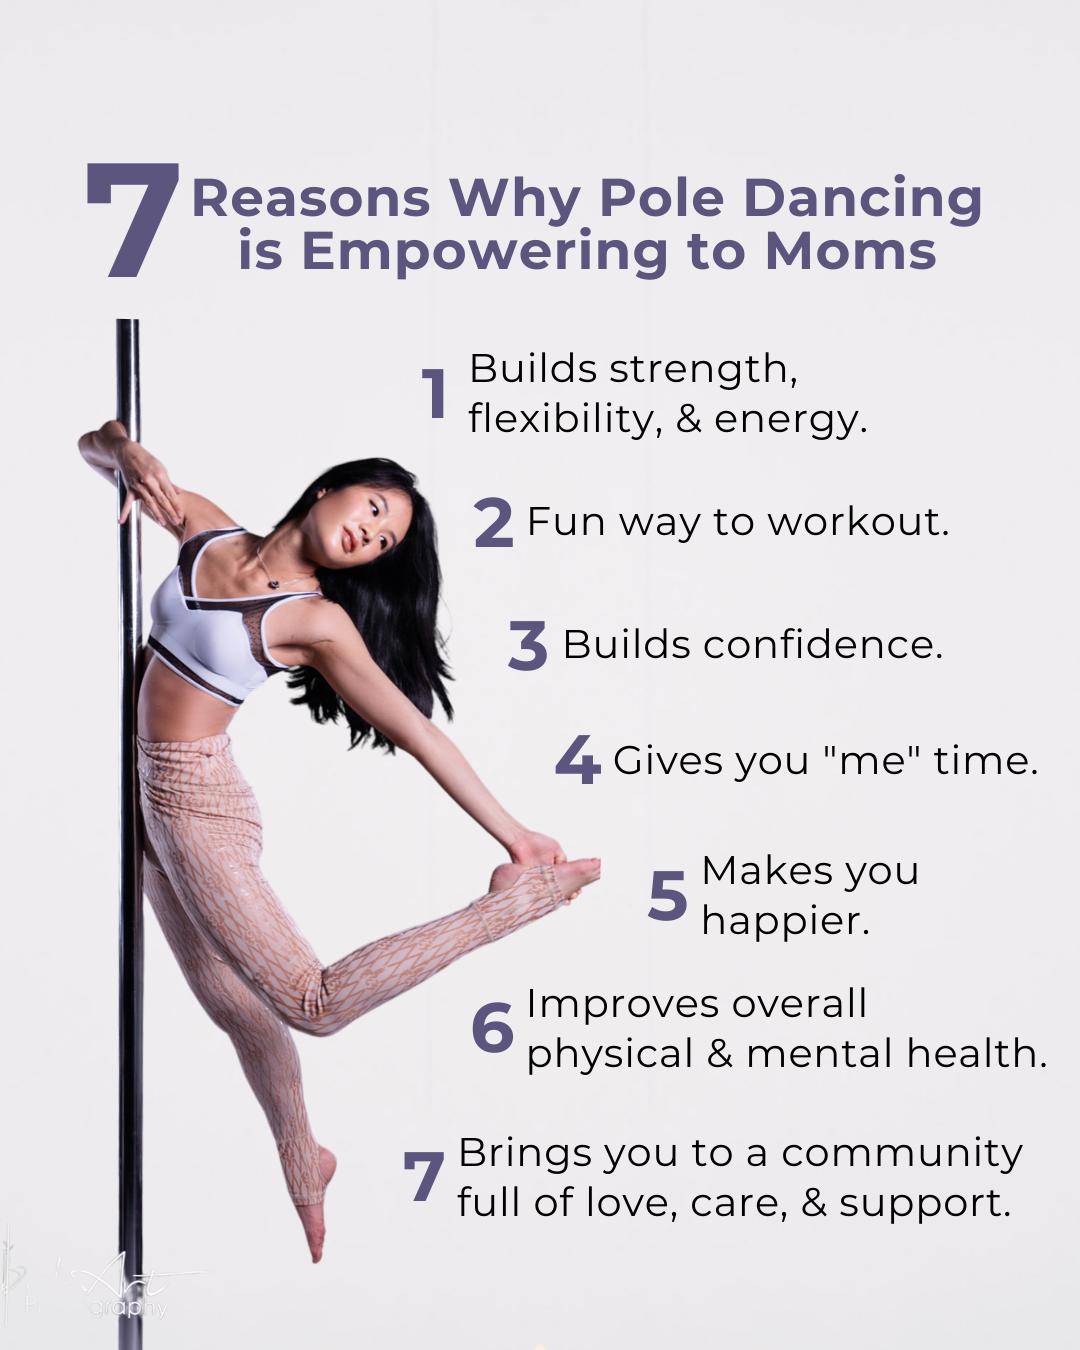 7 Reasons Why Pole Dancing is Empowering to Moms - Super Fly Honey Sticky  Pole Wear